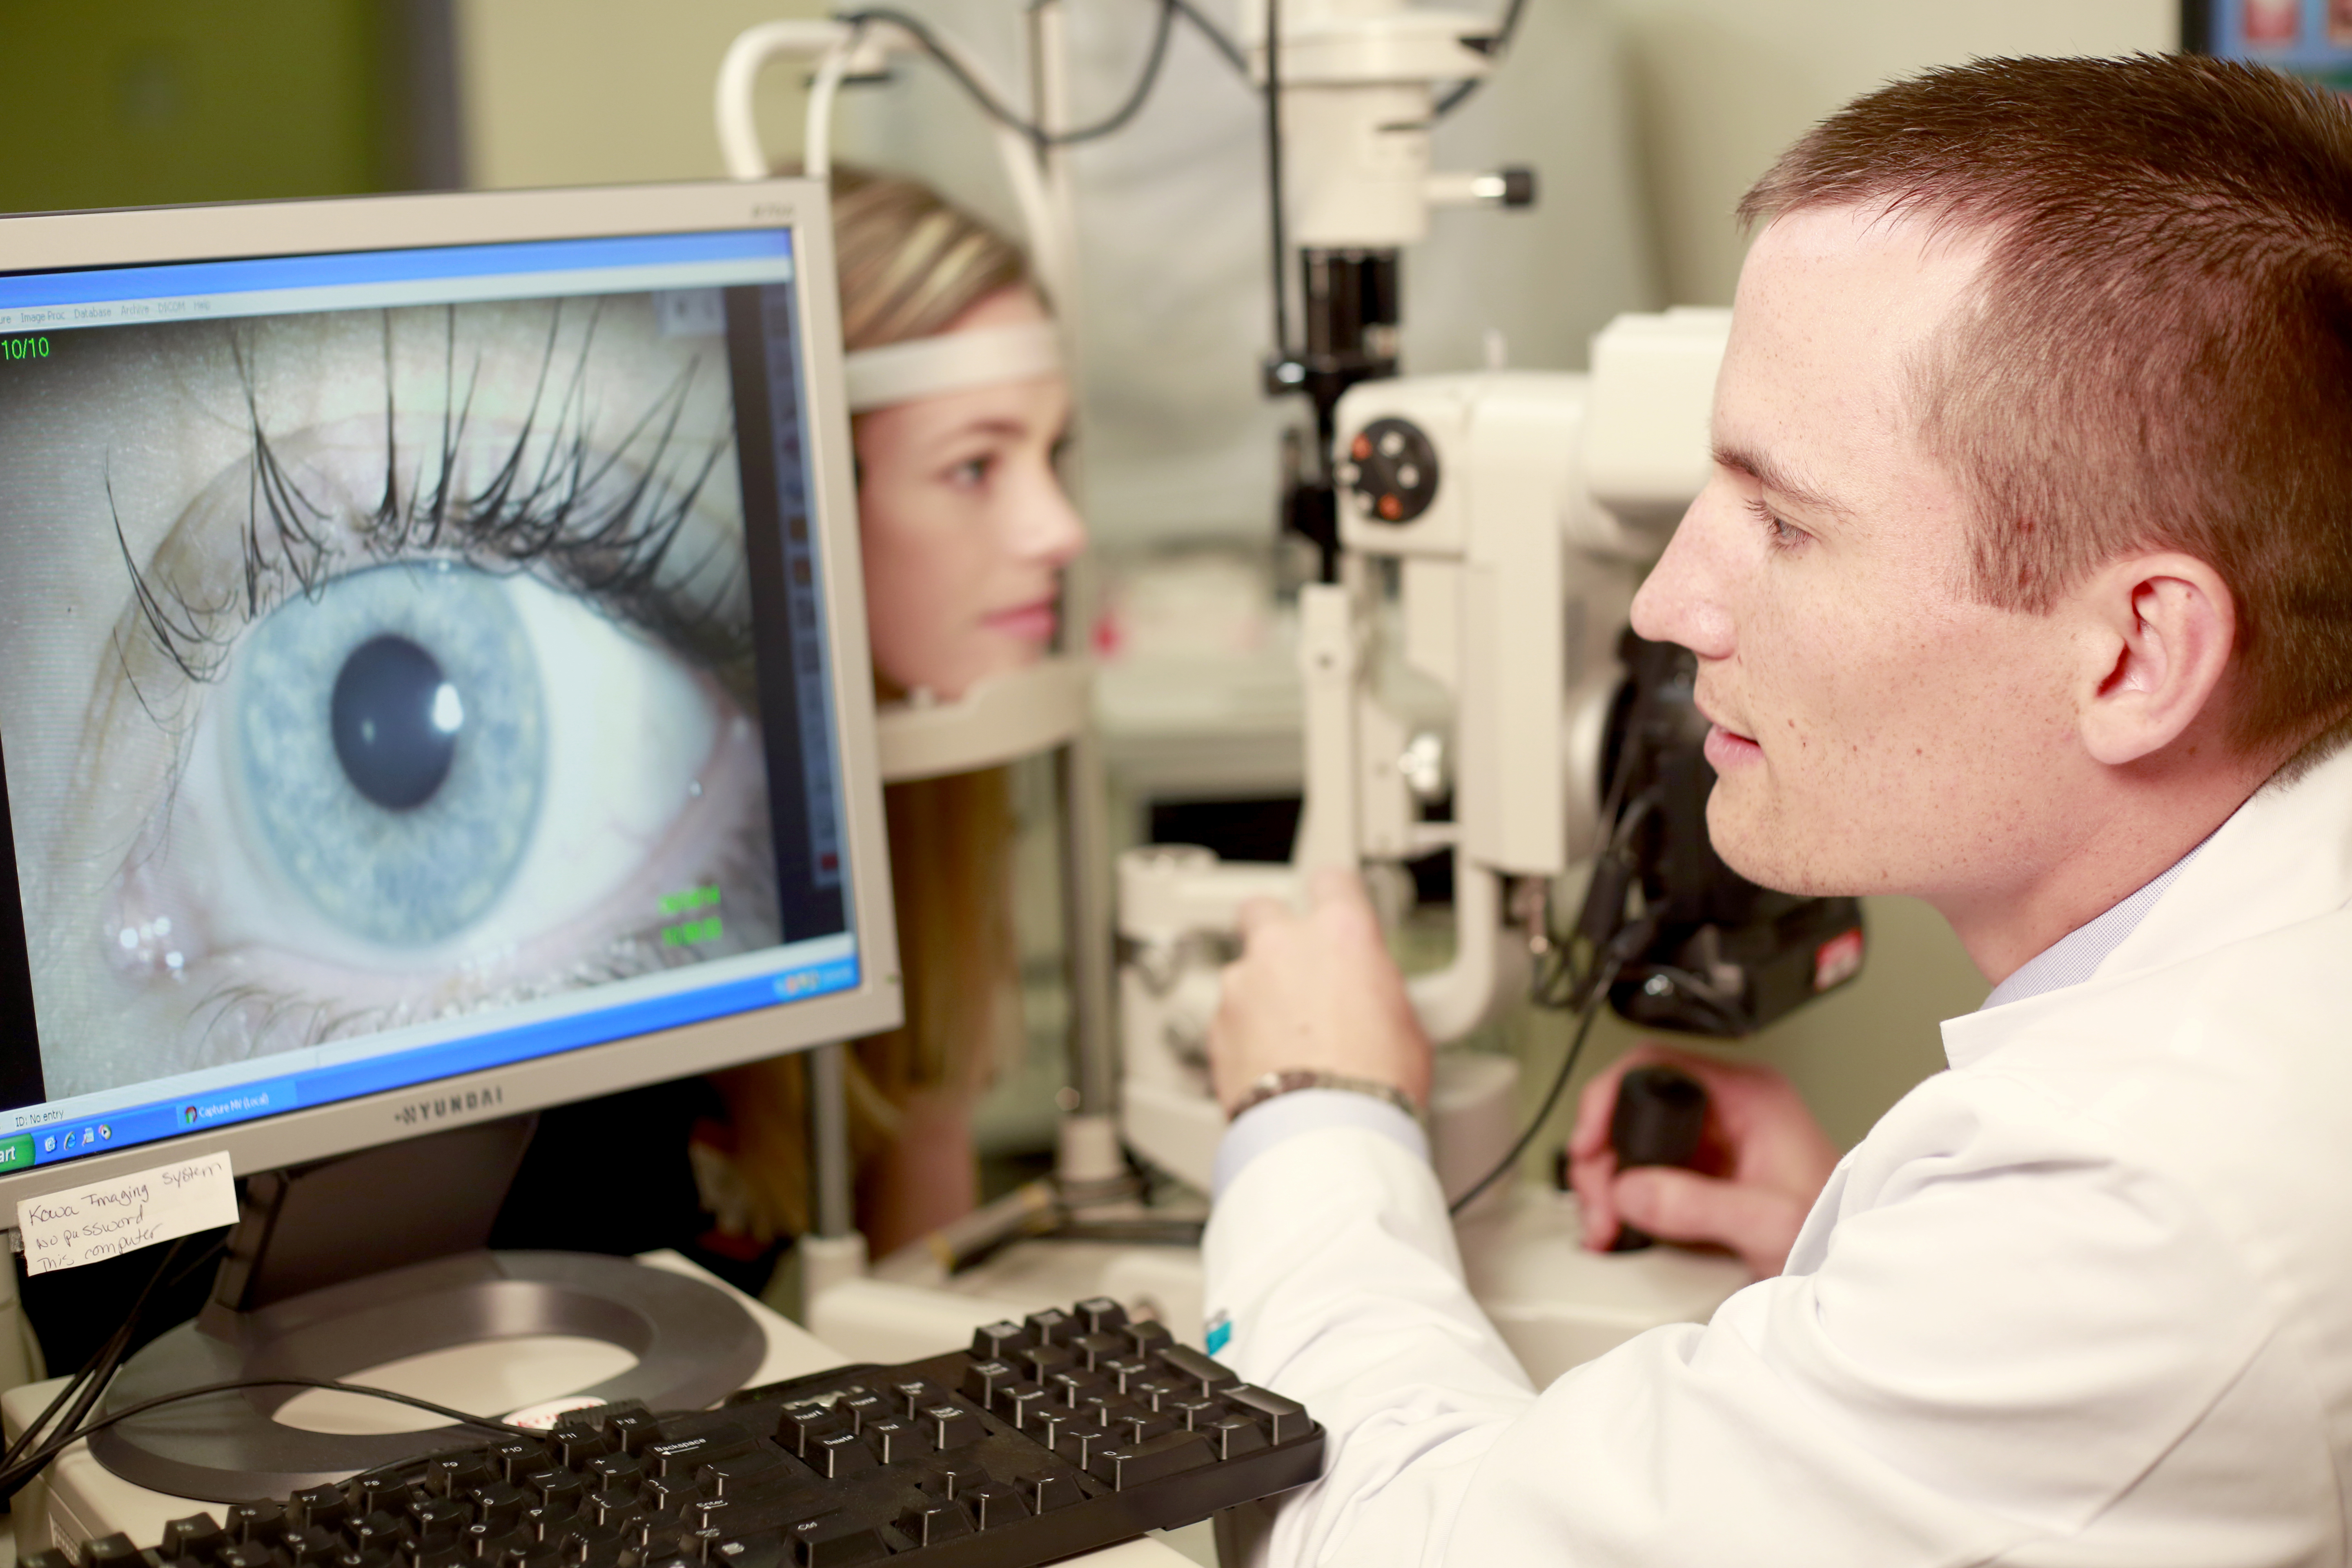 An optometry student examines a patient's eye using a large medical camera.